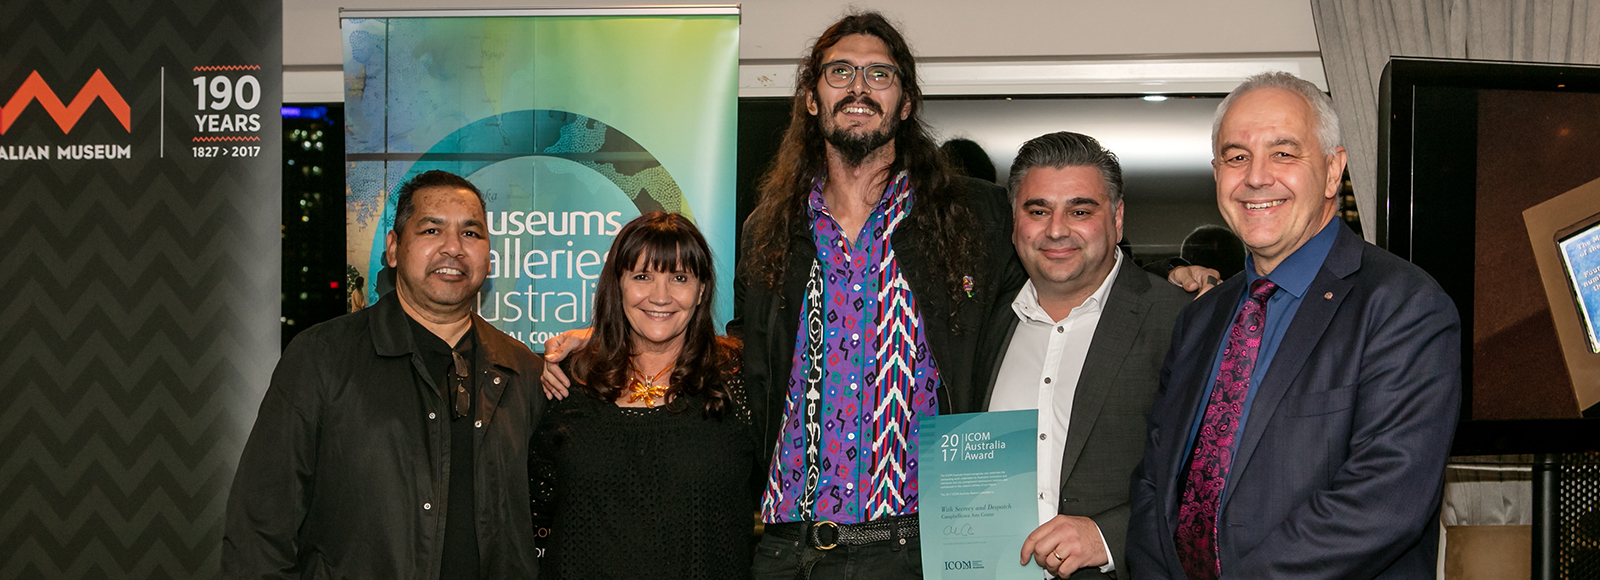 From left-right, Vernon Ah Kee (Commissioned Artist), Tess Allas (Curator), Dale Harding (Commissioned Artist), Michael Dagostino (Director of Campbelltown Arts Centre), Alec Coles (Chair of ICOM Australia). Photo: Benny Jewel